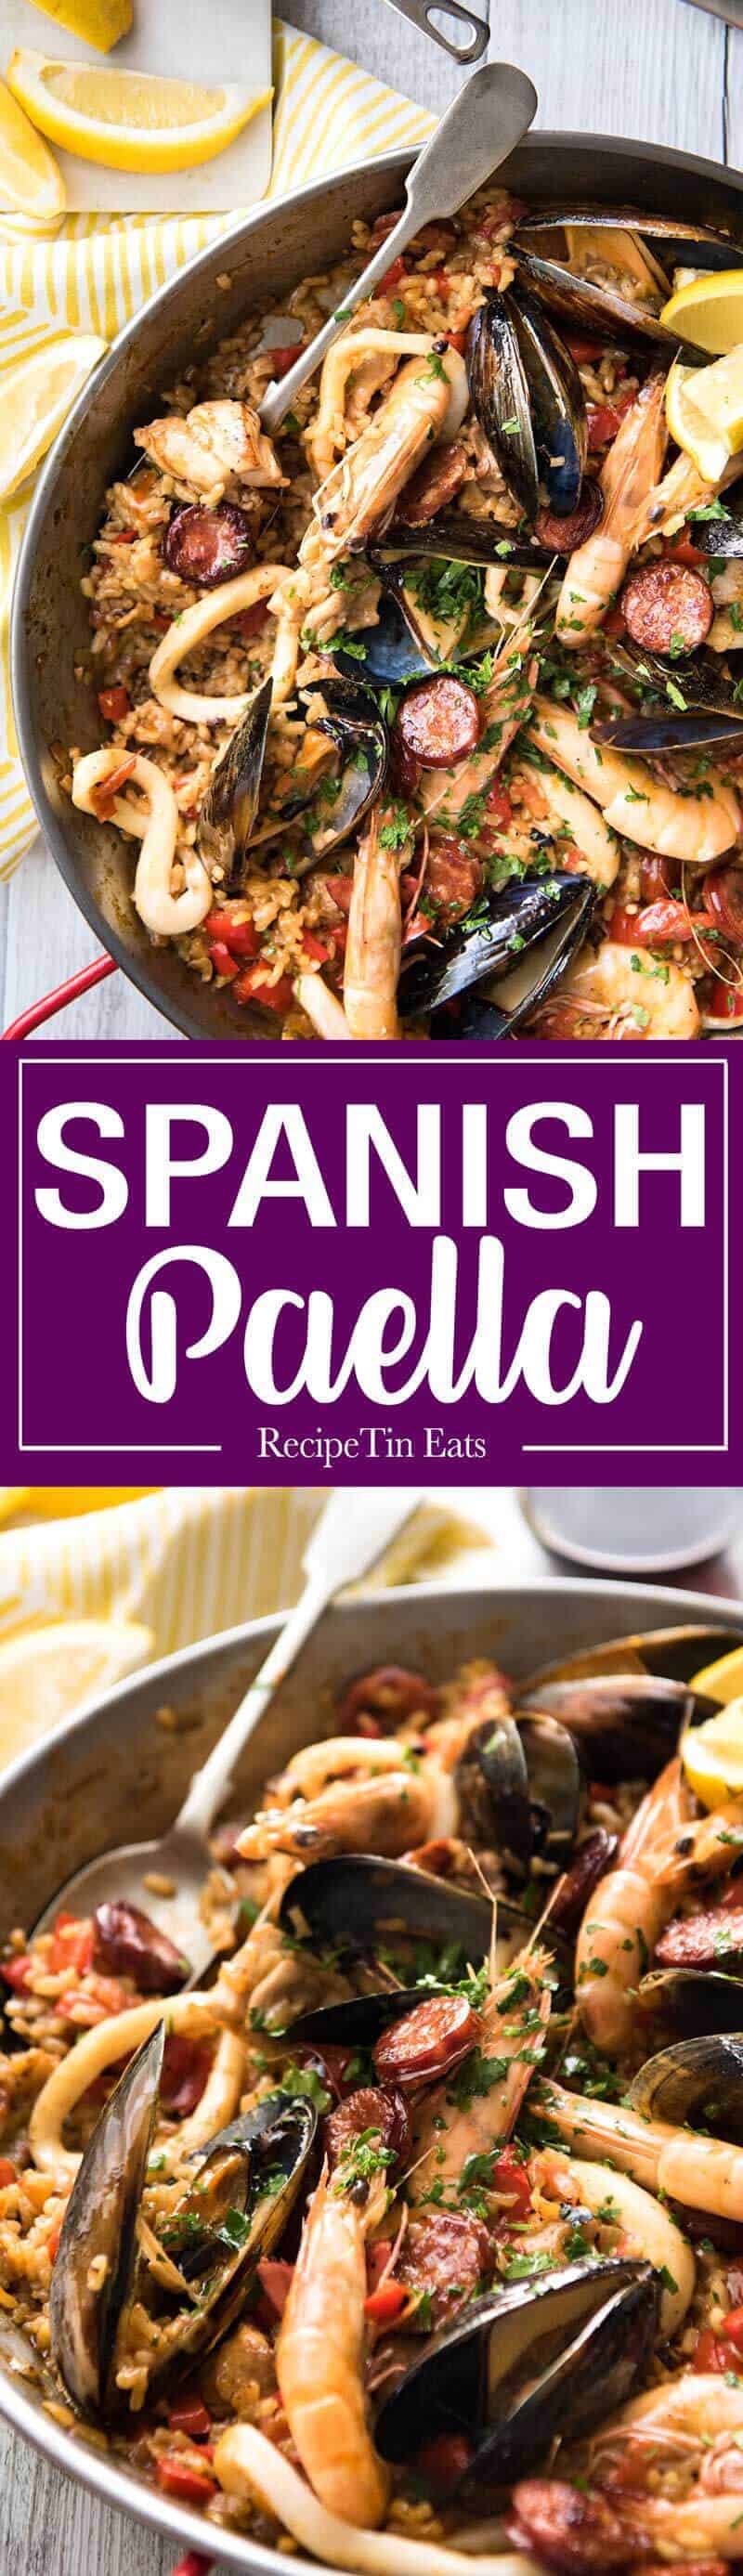 Spanish Paella - The right rice, right amount of liquid and the base seasonings is the foundation of a great Paella. The additions are up to you! This is a classic Chicken & Seafood Paella. recipetineats.com